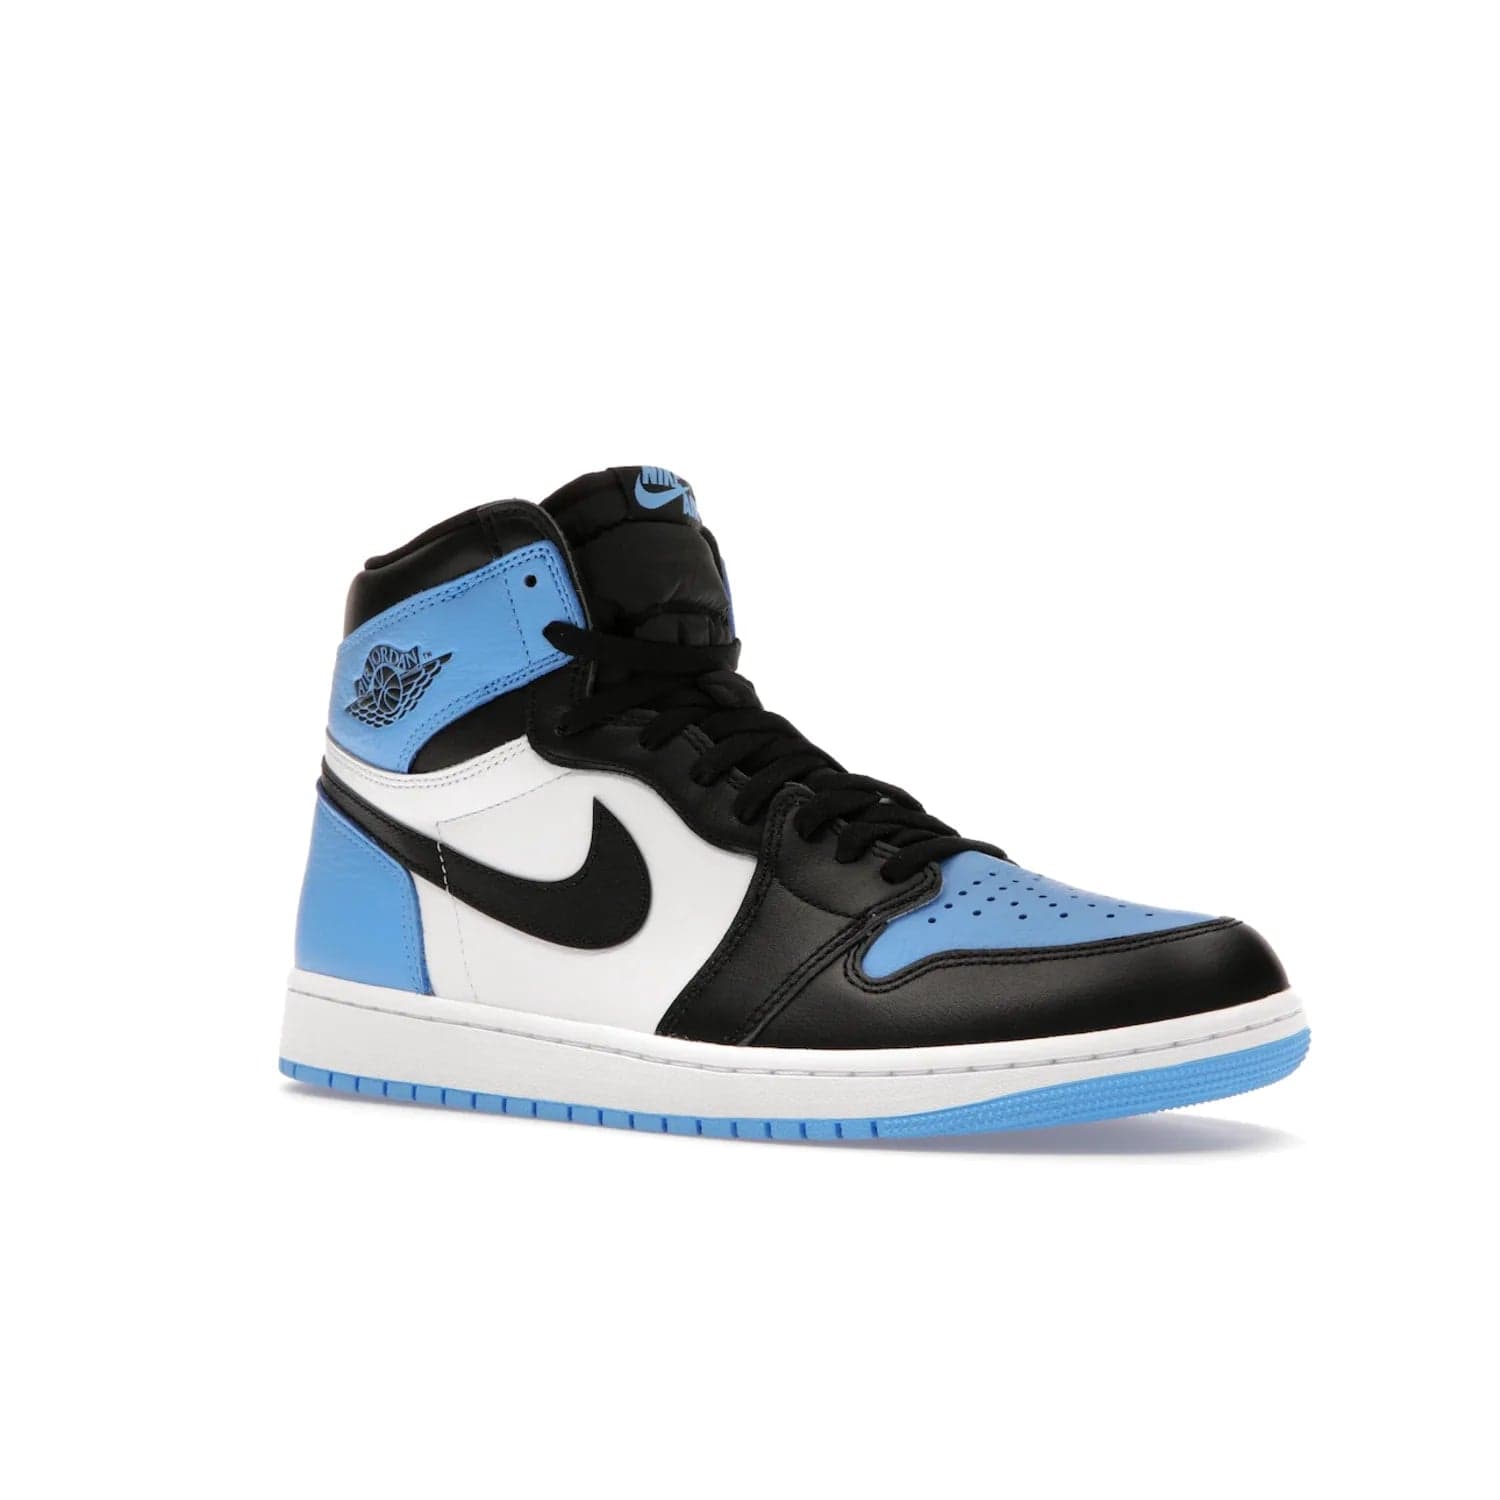 Jordan 1 Retro High OG UNC Toe - Image 4 - Only at www.BallersClubKickz.com - Jordan 1 High OG UNC Toe is a fashionable, high-quality sneaker featuring University Blue, Black White and White. Releasing July 22, 2023, it's the perfect pick up for sneakerheads.